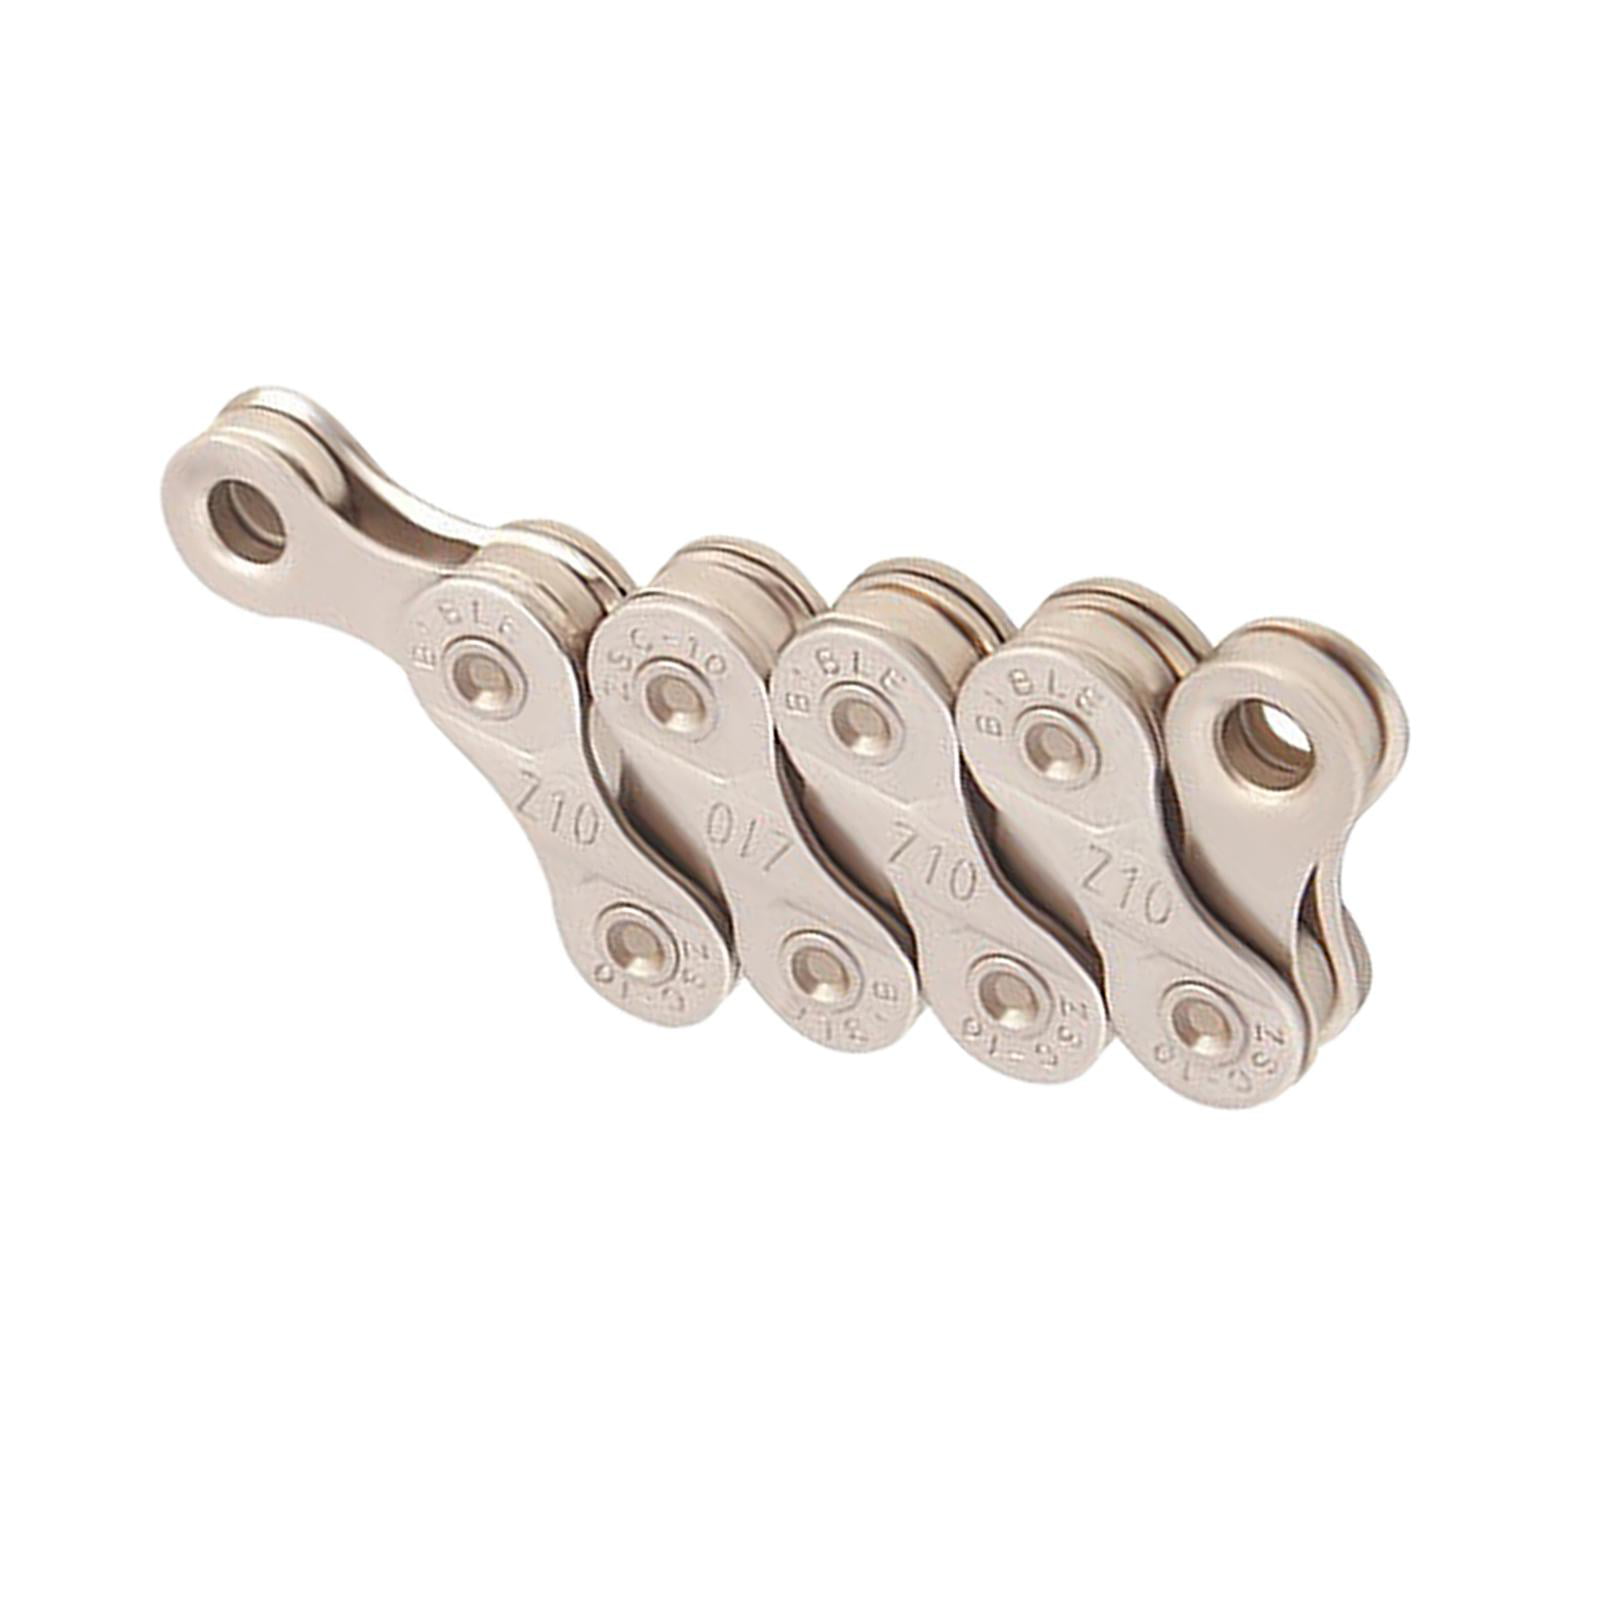 Bike Chain MTB Bicycle Repair Chains Link Connector Joiner Replacement